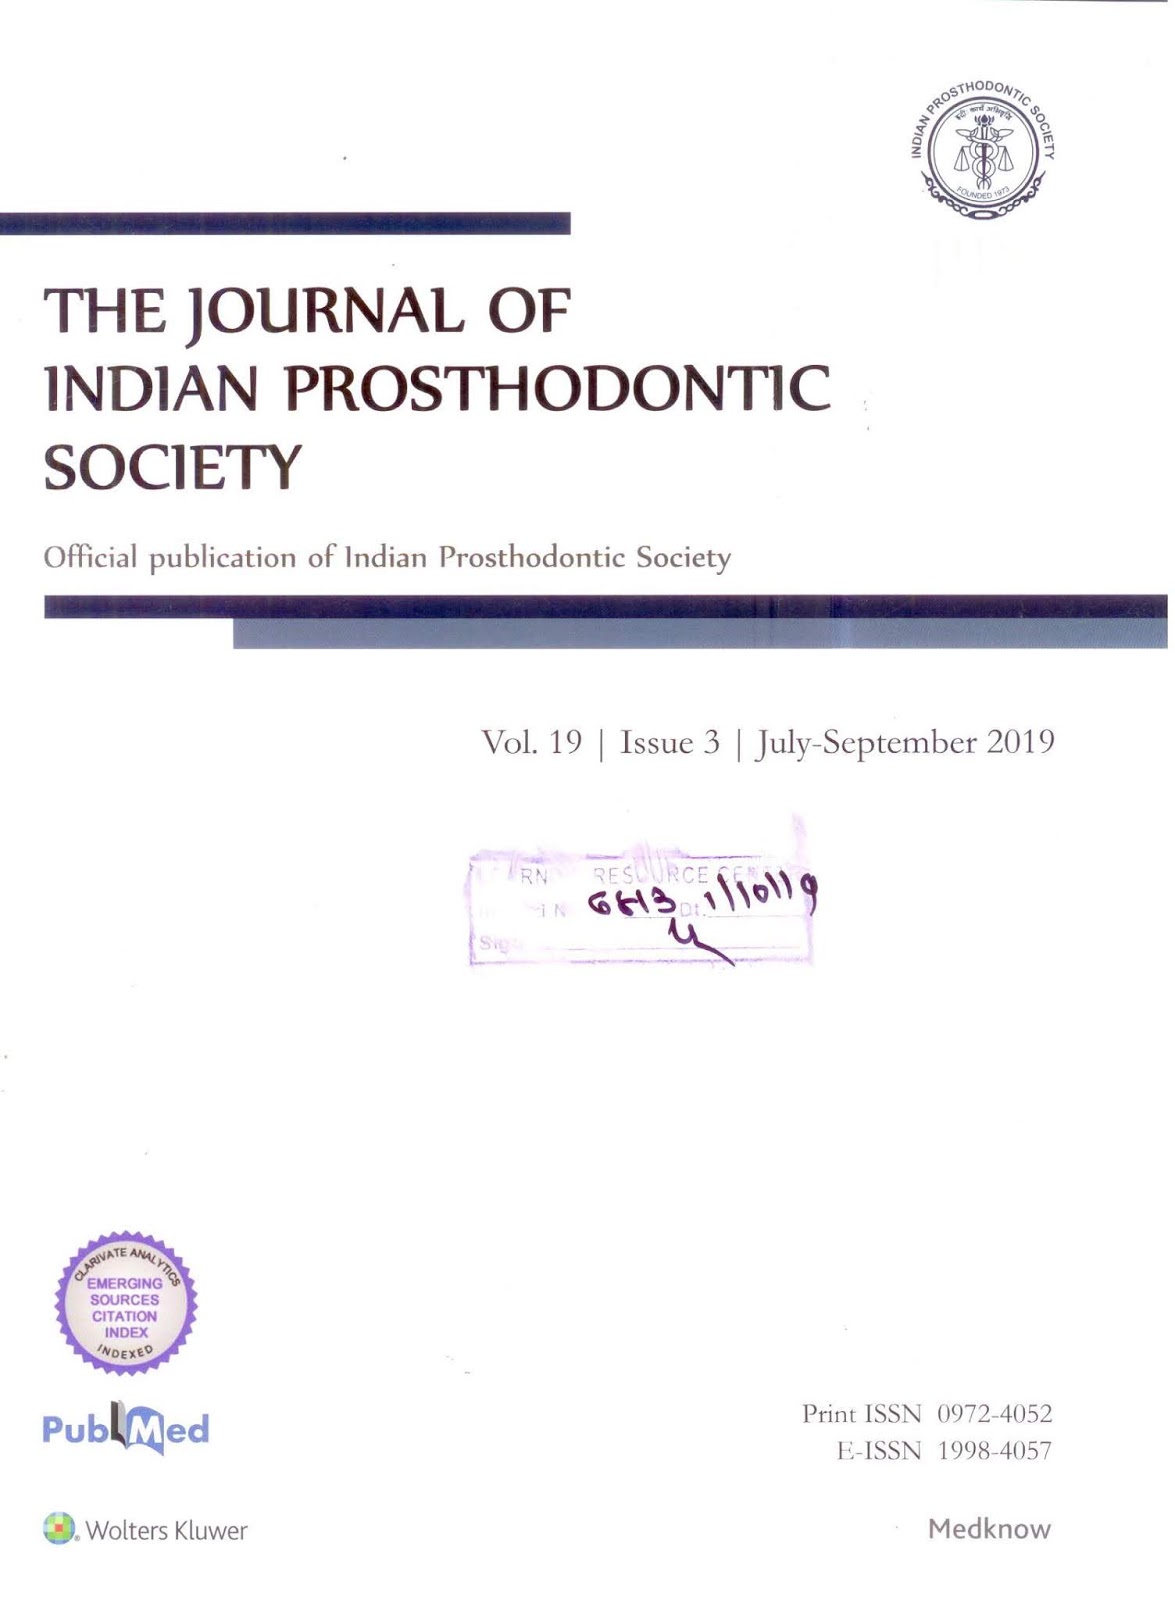 http://www.j-ips.org/showBackIssue.asp?issn=0972-4052;year=2019;volume=19;issue=3;month=July-September